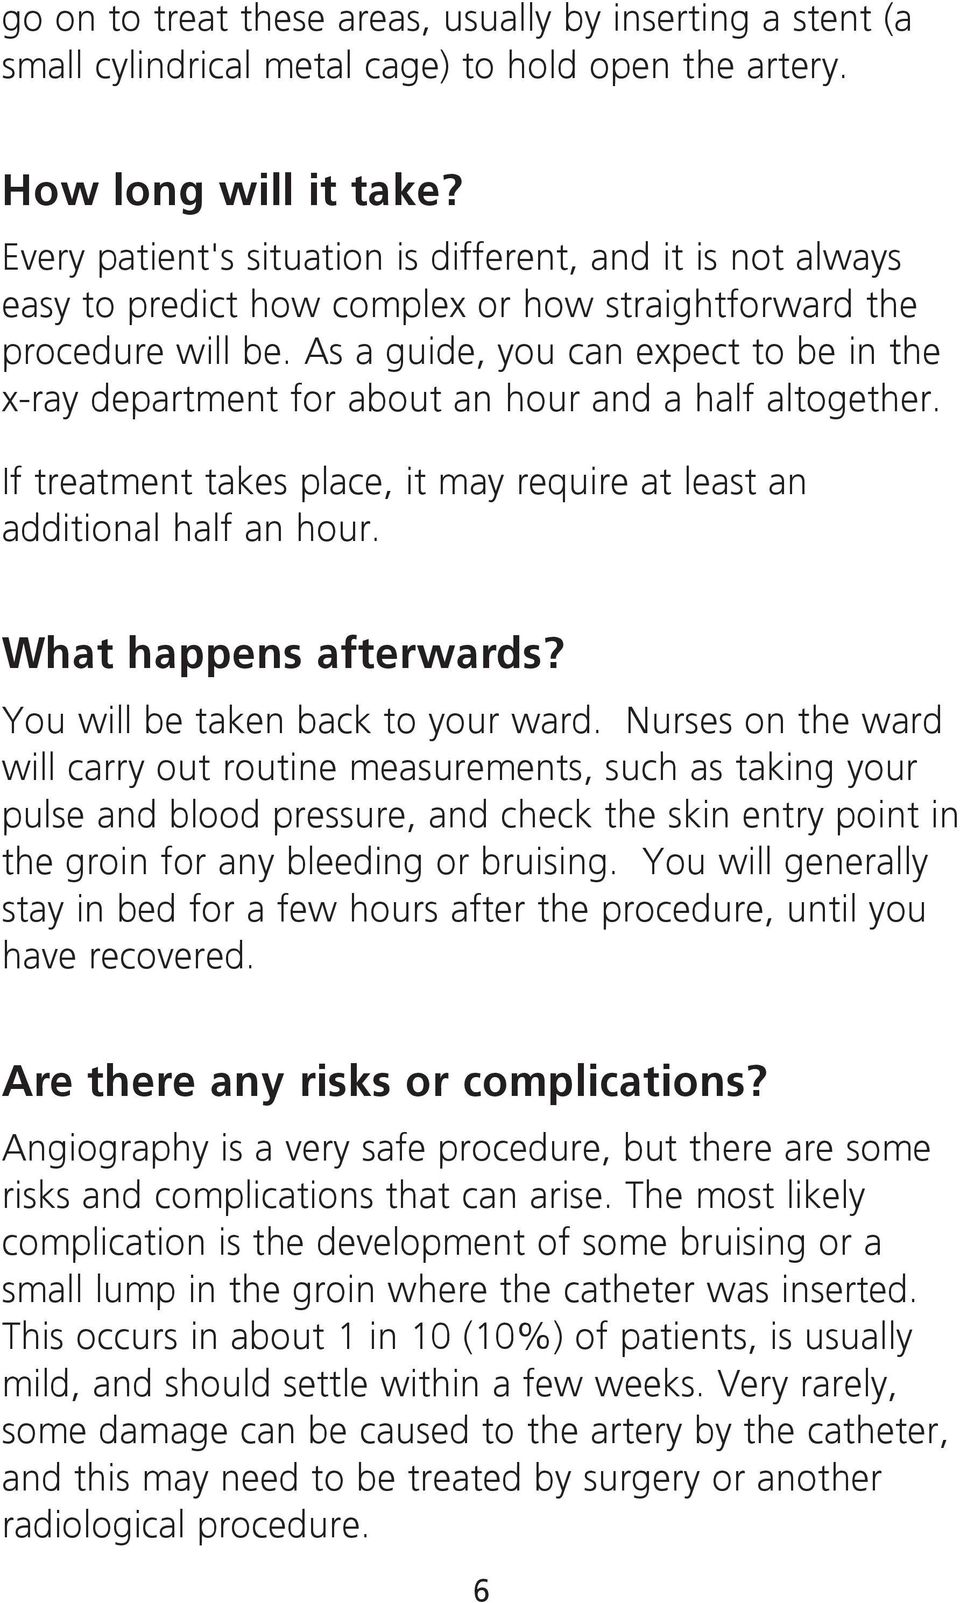 As a guide, you can expect to be in the x-ray department for about an hour and a half altogether. If treatment takes place, it may require at least an additional half an hour. What happens afterwards?